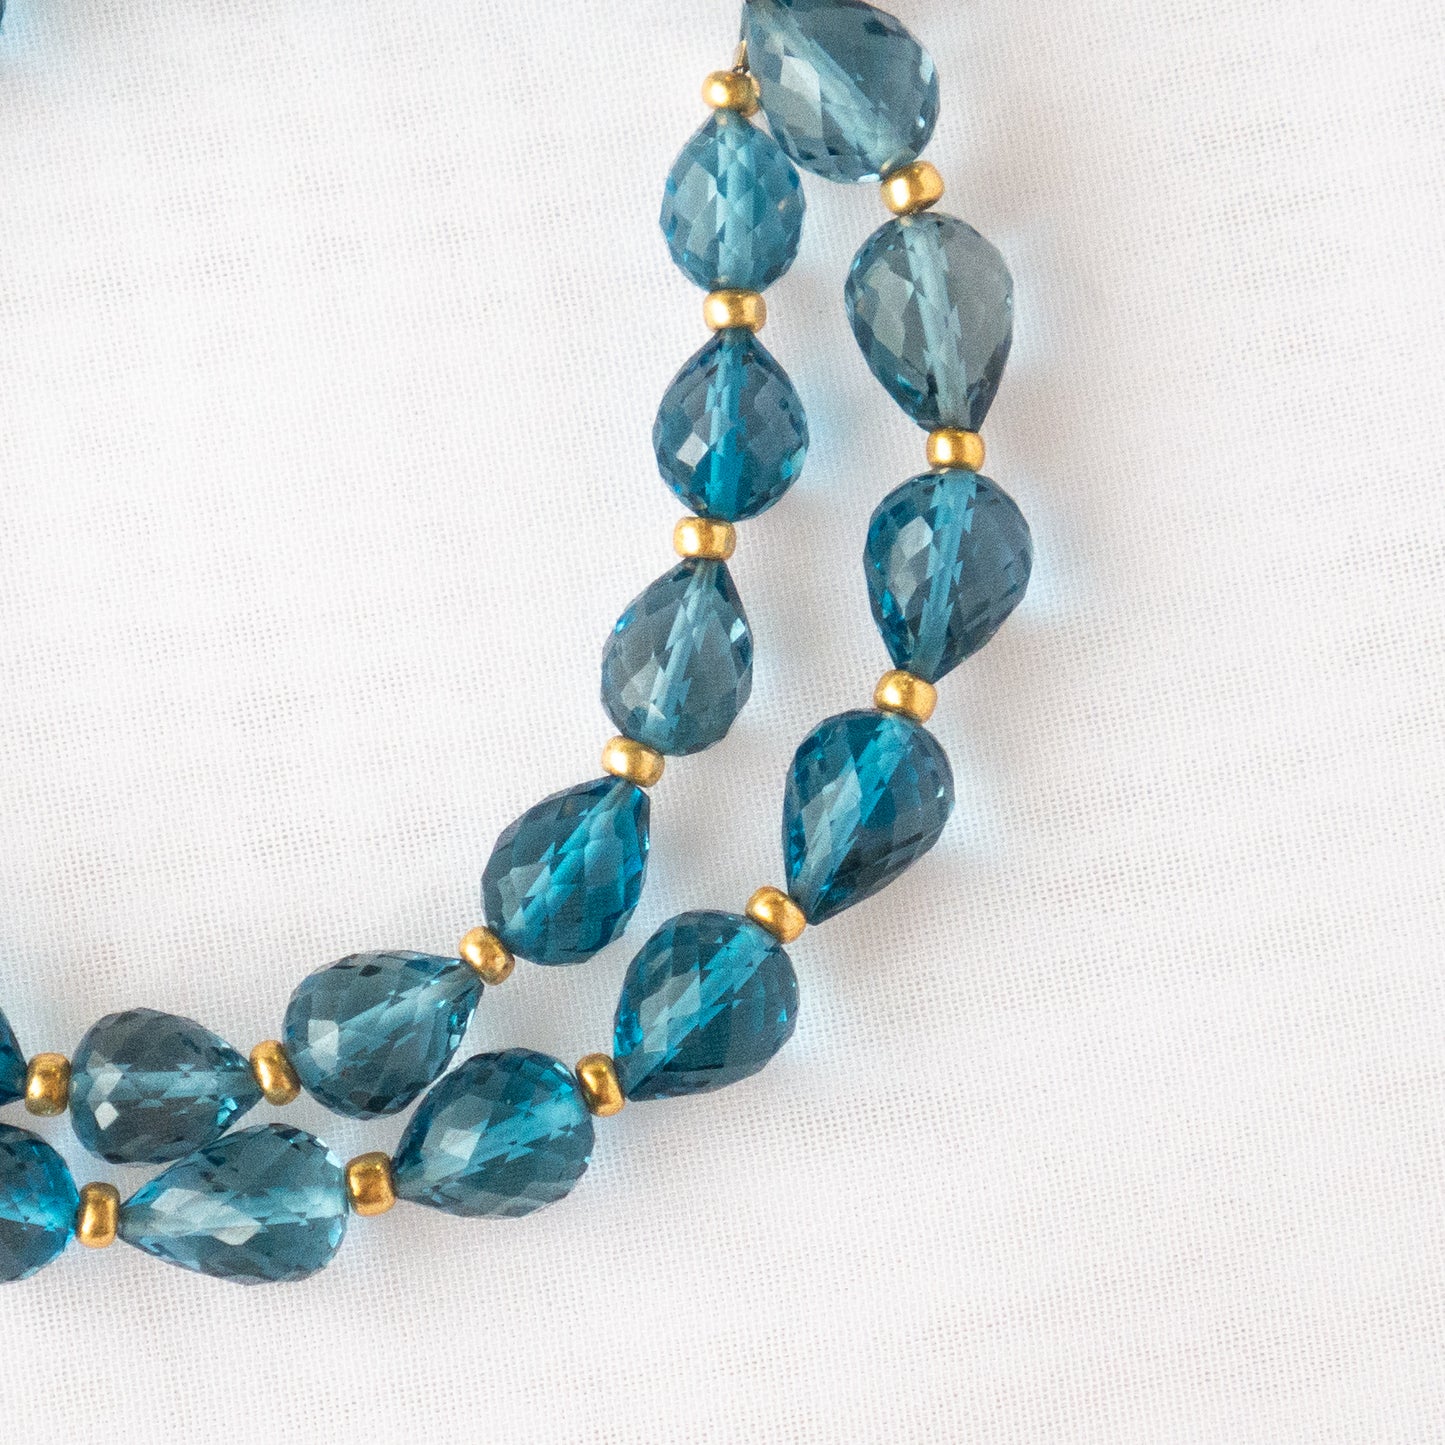 London Blue Topaz Micro Faceted Tear Drop Beads 1Strand